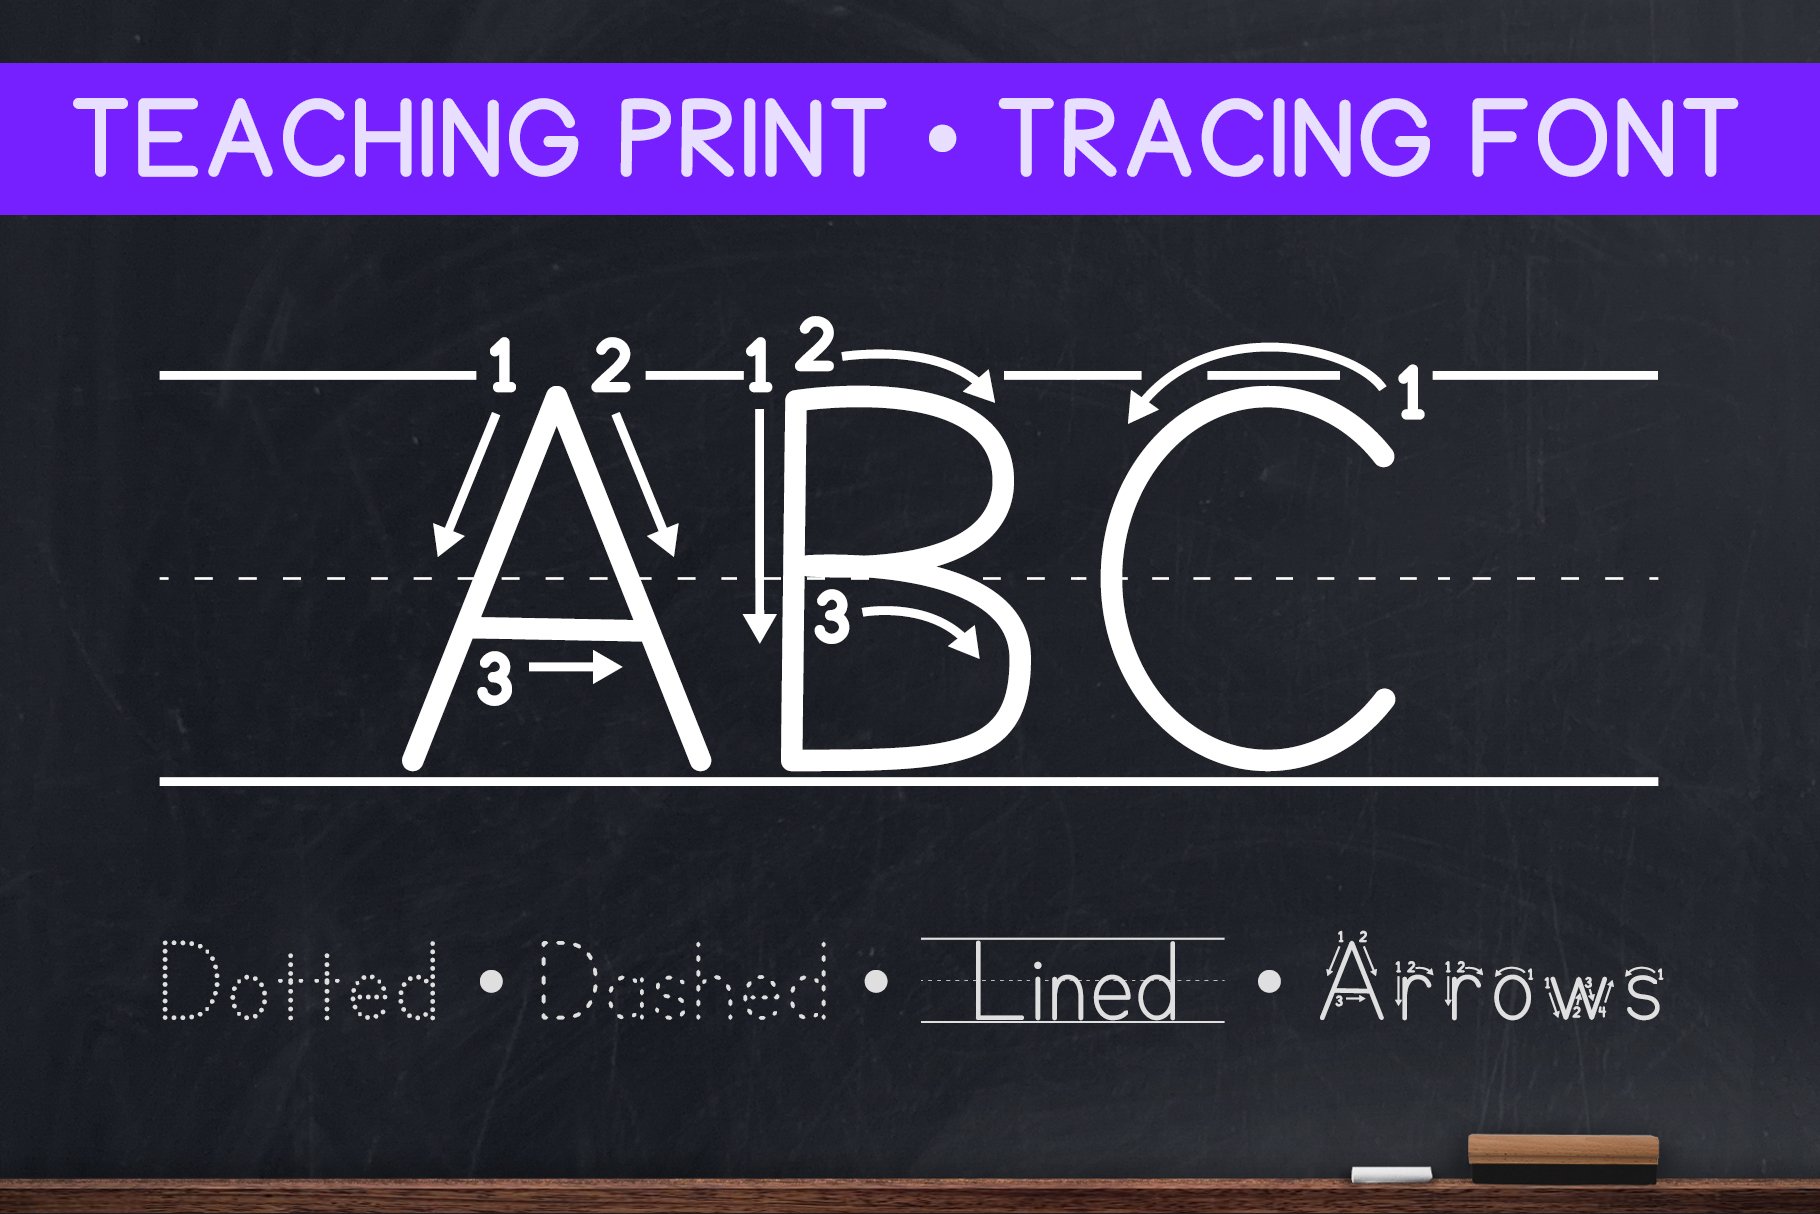 Teaching Print • Letter Tracing Font cover image.